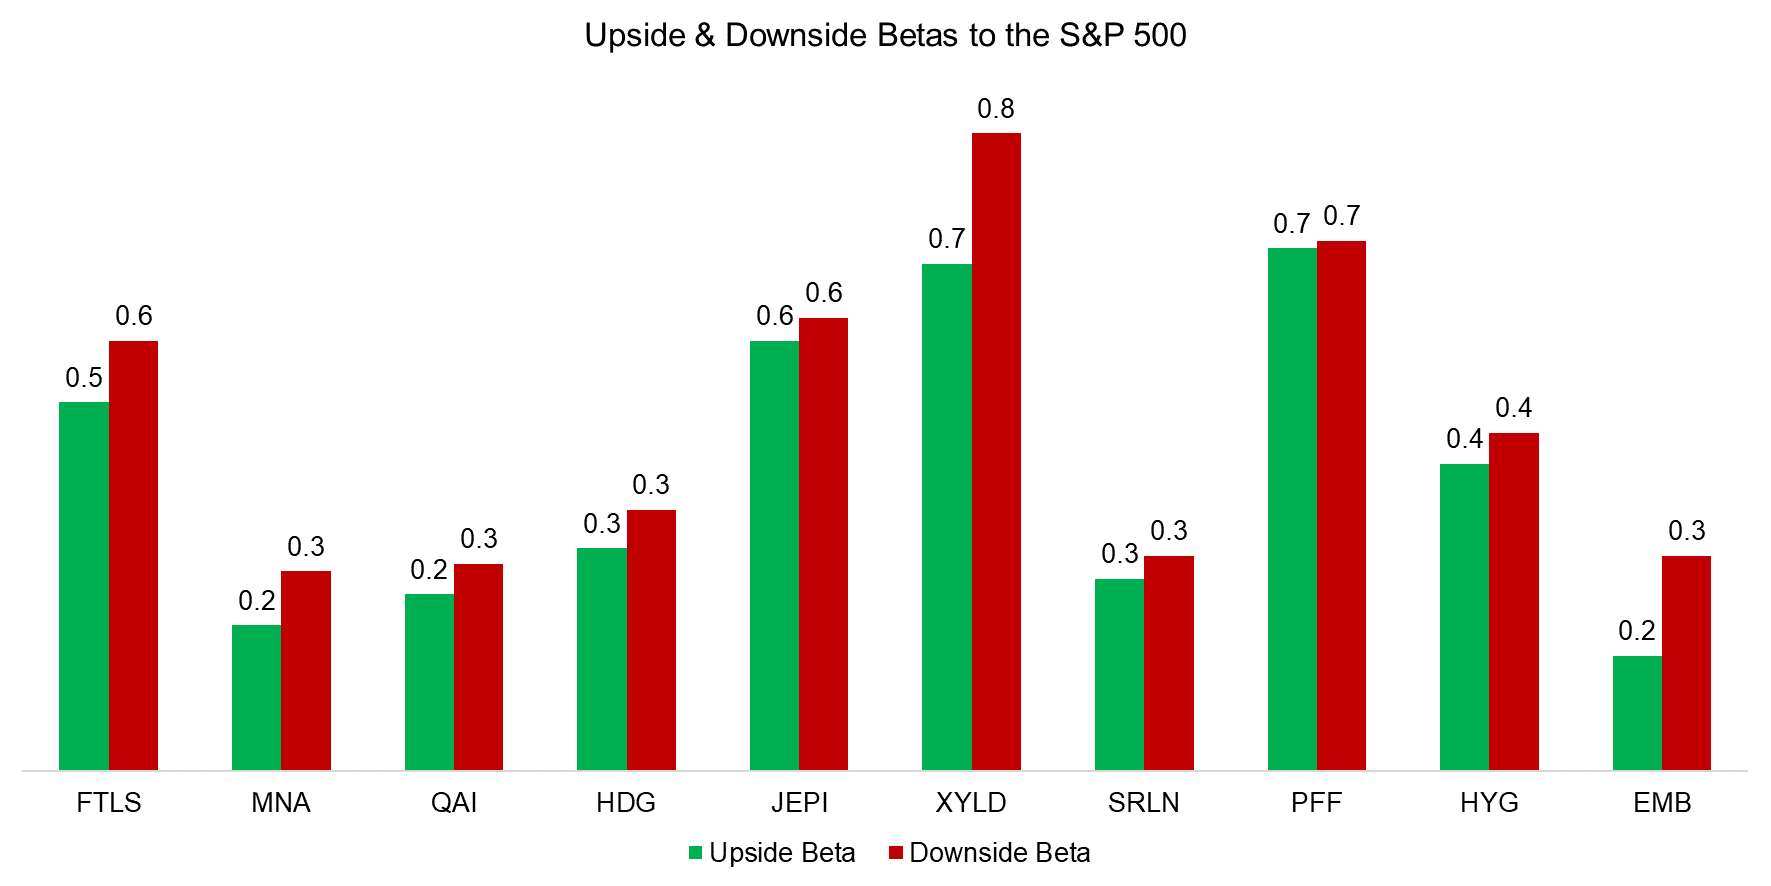 Upside & Downside Betas to the S&P 500